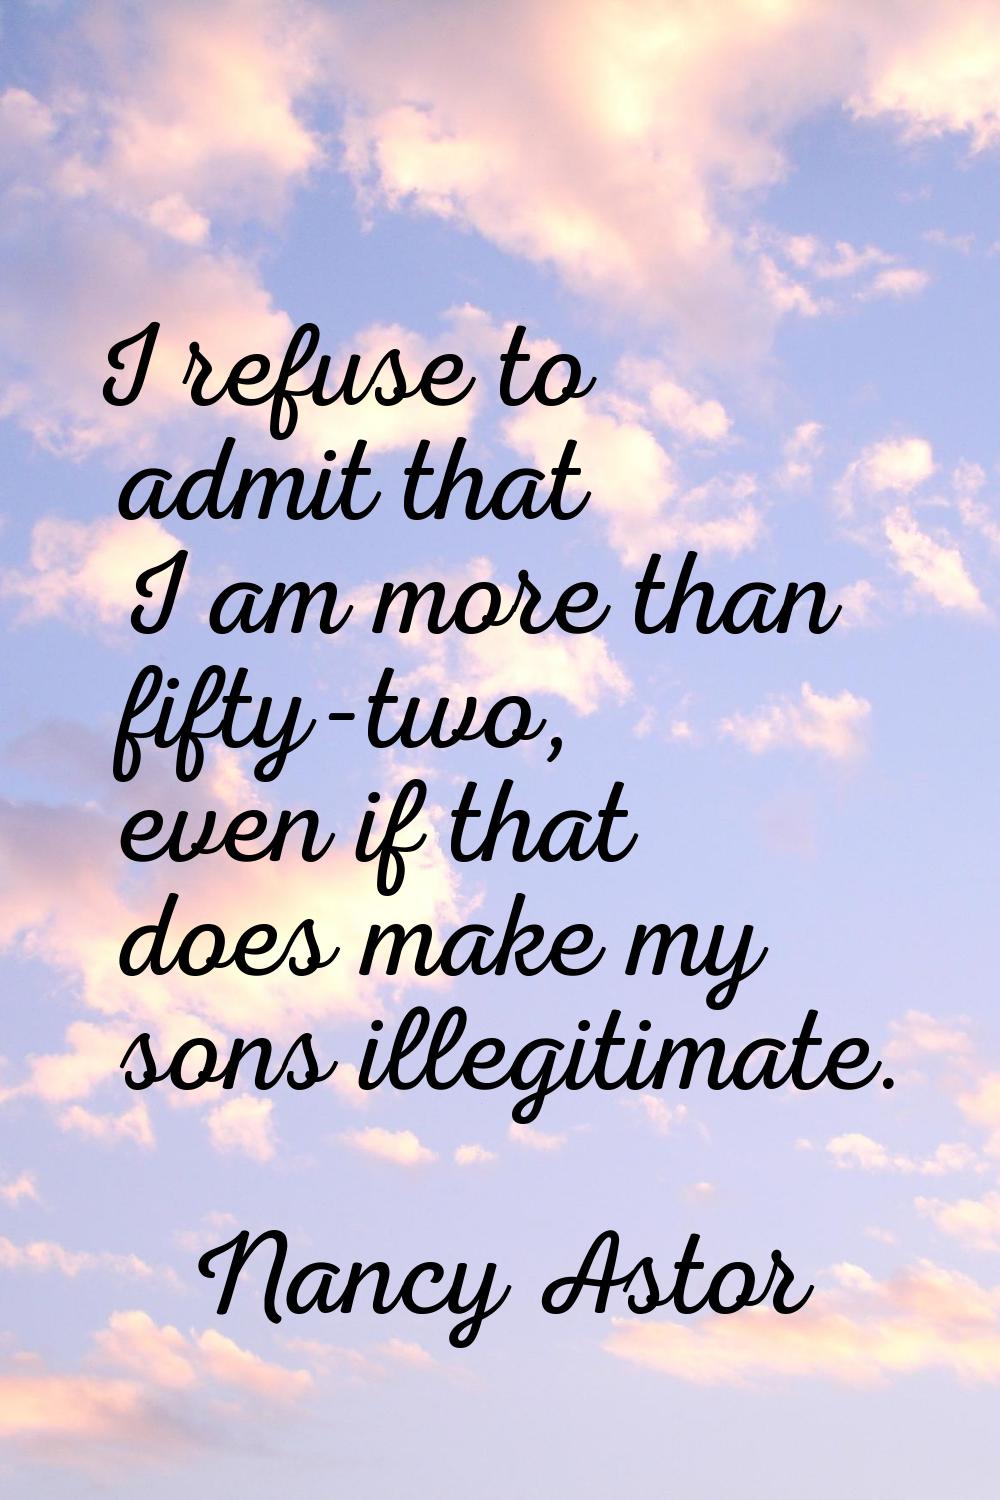 I refuse to admit that I am more than fifty-two, even if that does make my sons illegitimate.